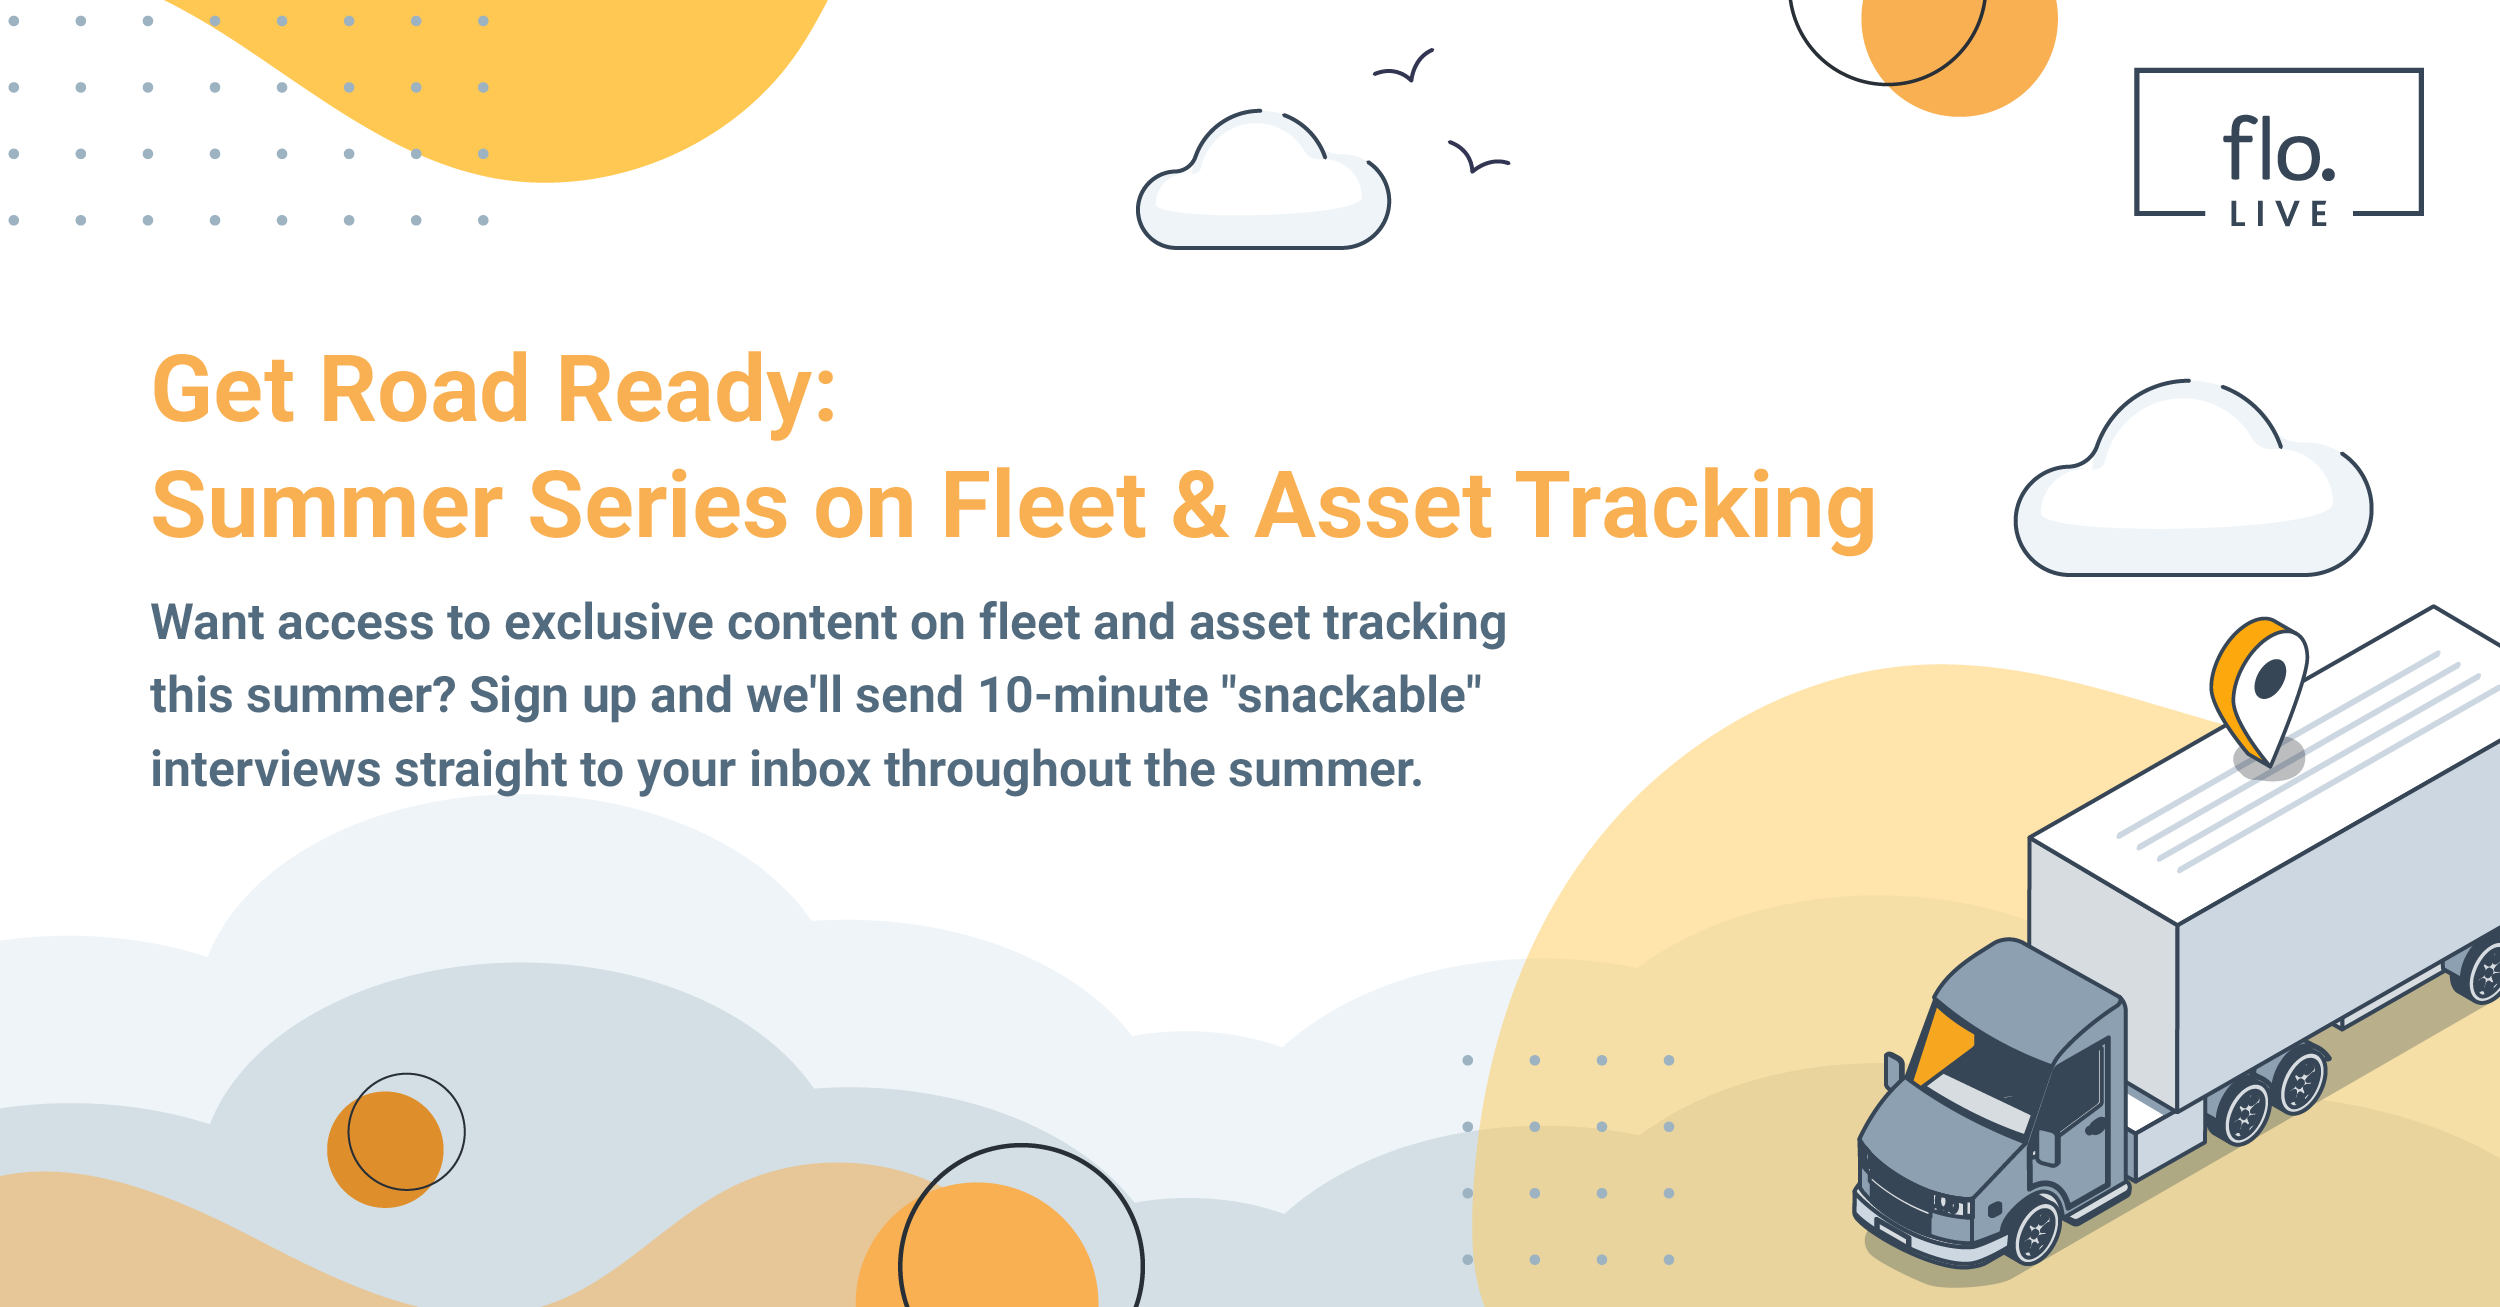 floLIVE Summer Series focuses on fleet and asset management through a series of 10-minute video episodes.